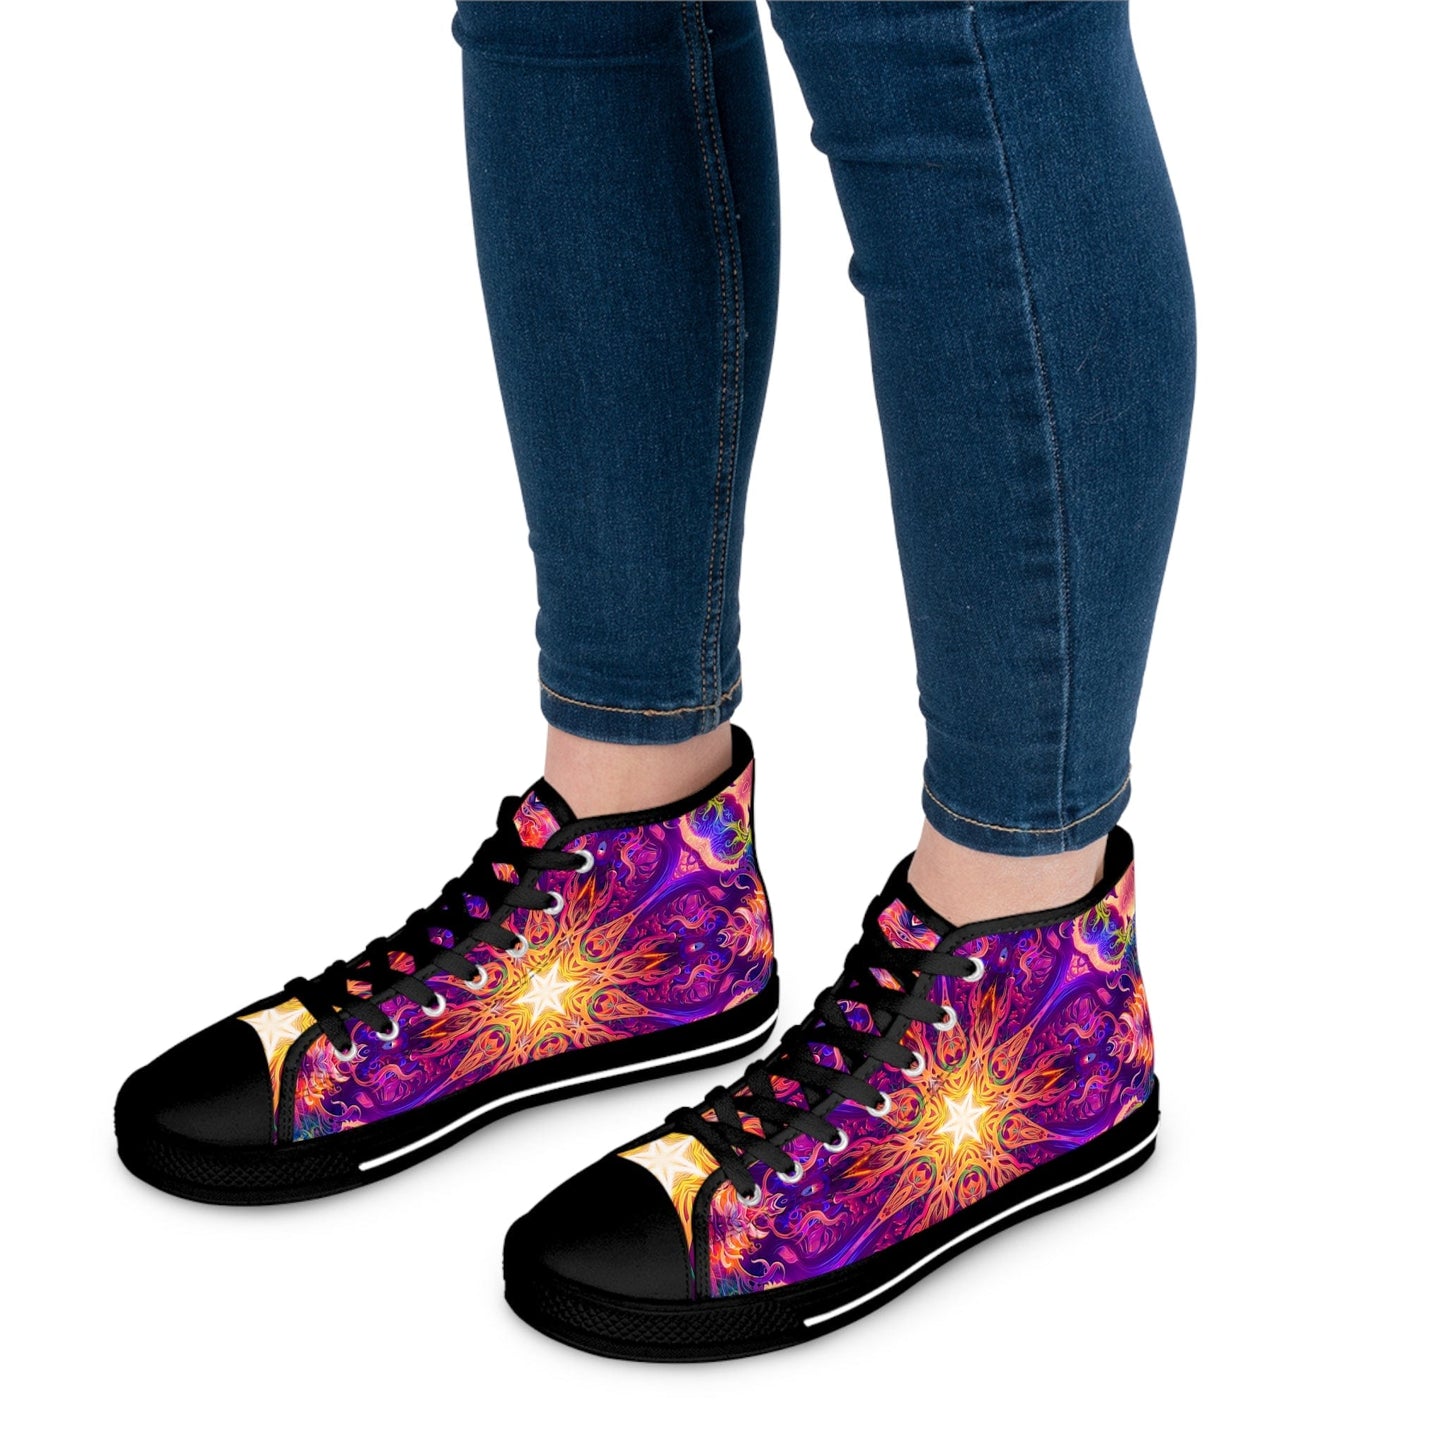 "The Sacred Circle" WOMEN'S HIGHT TOP SNEAKERS